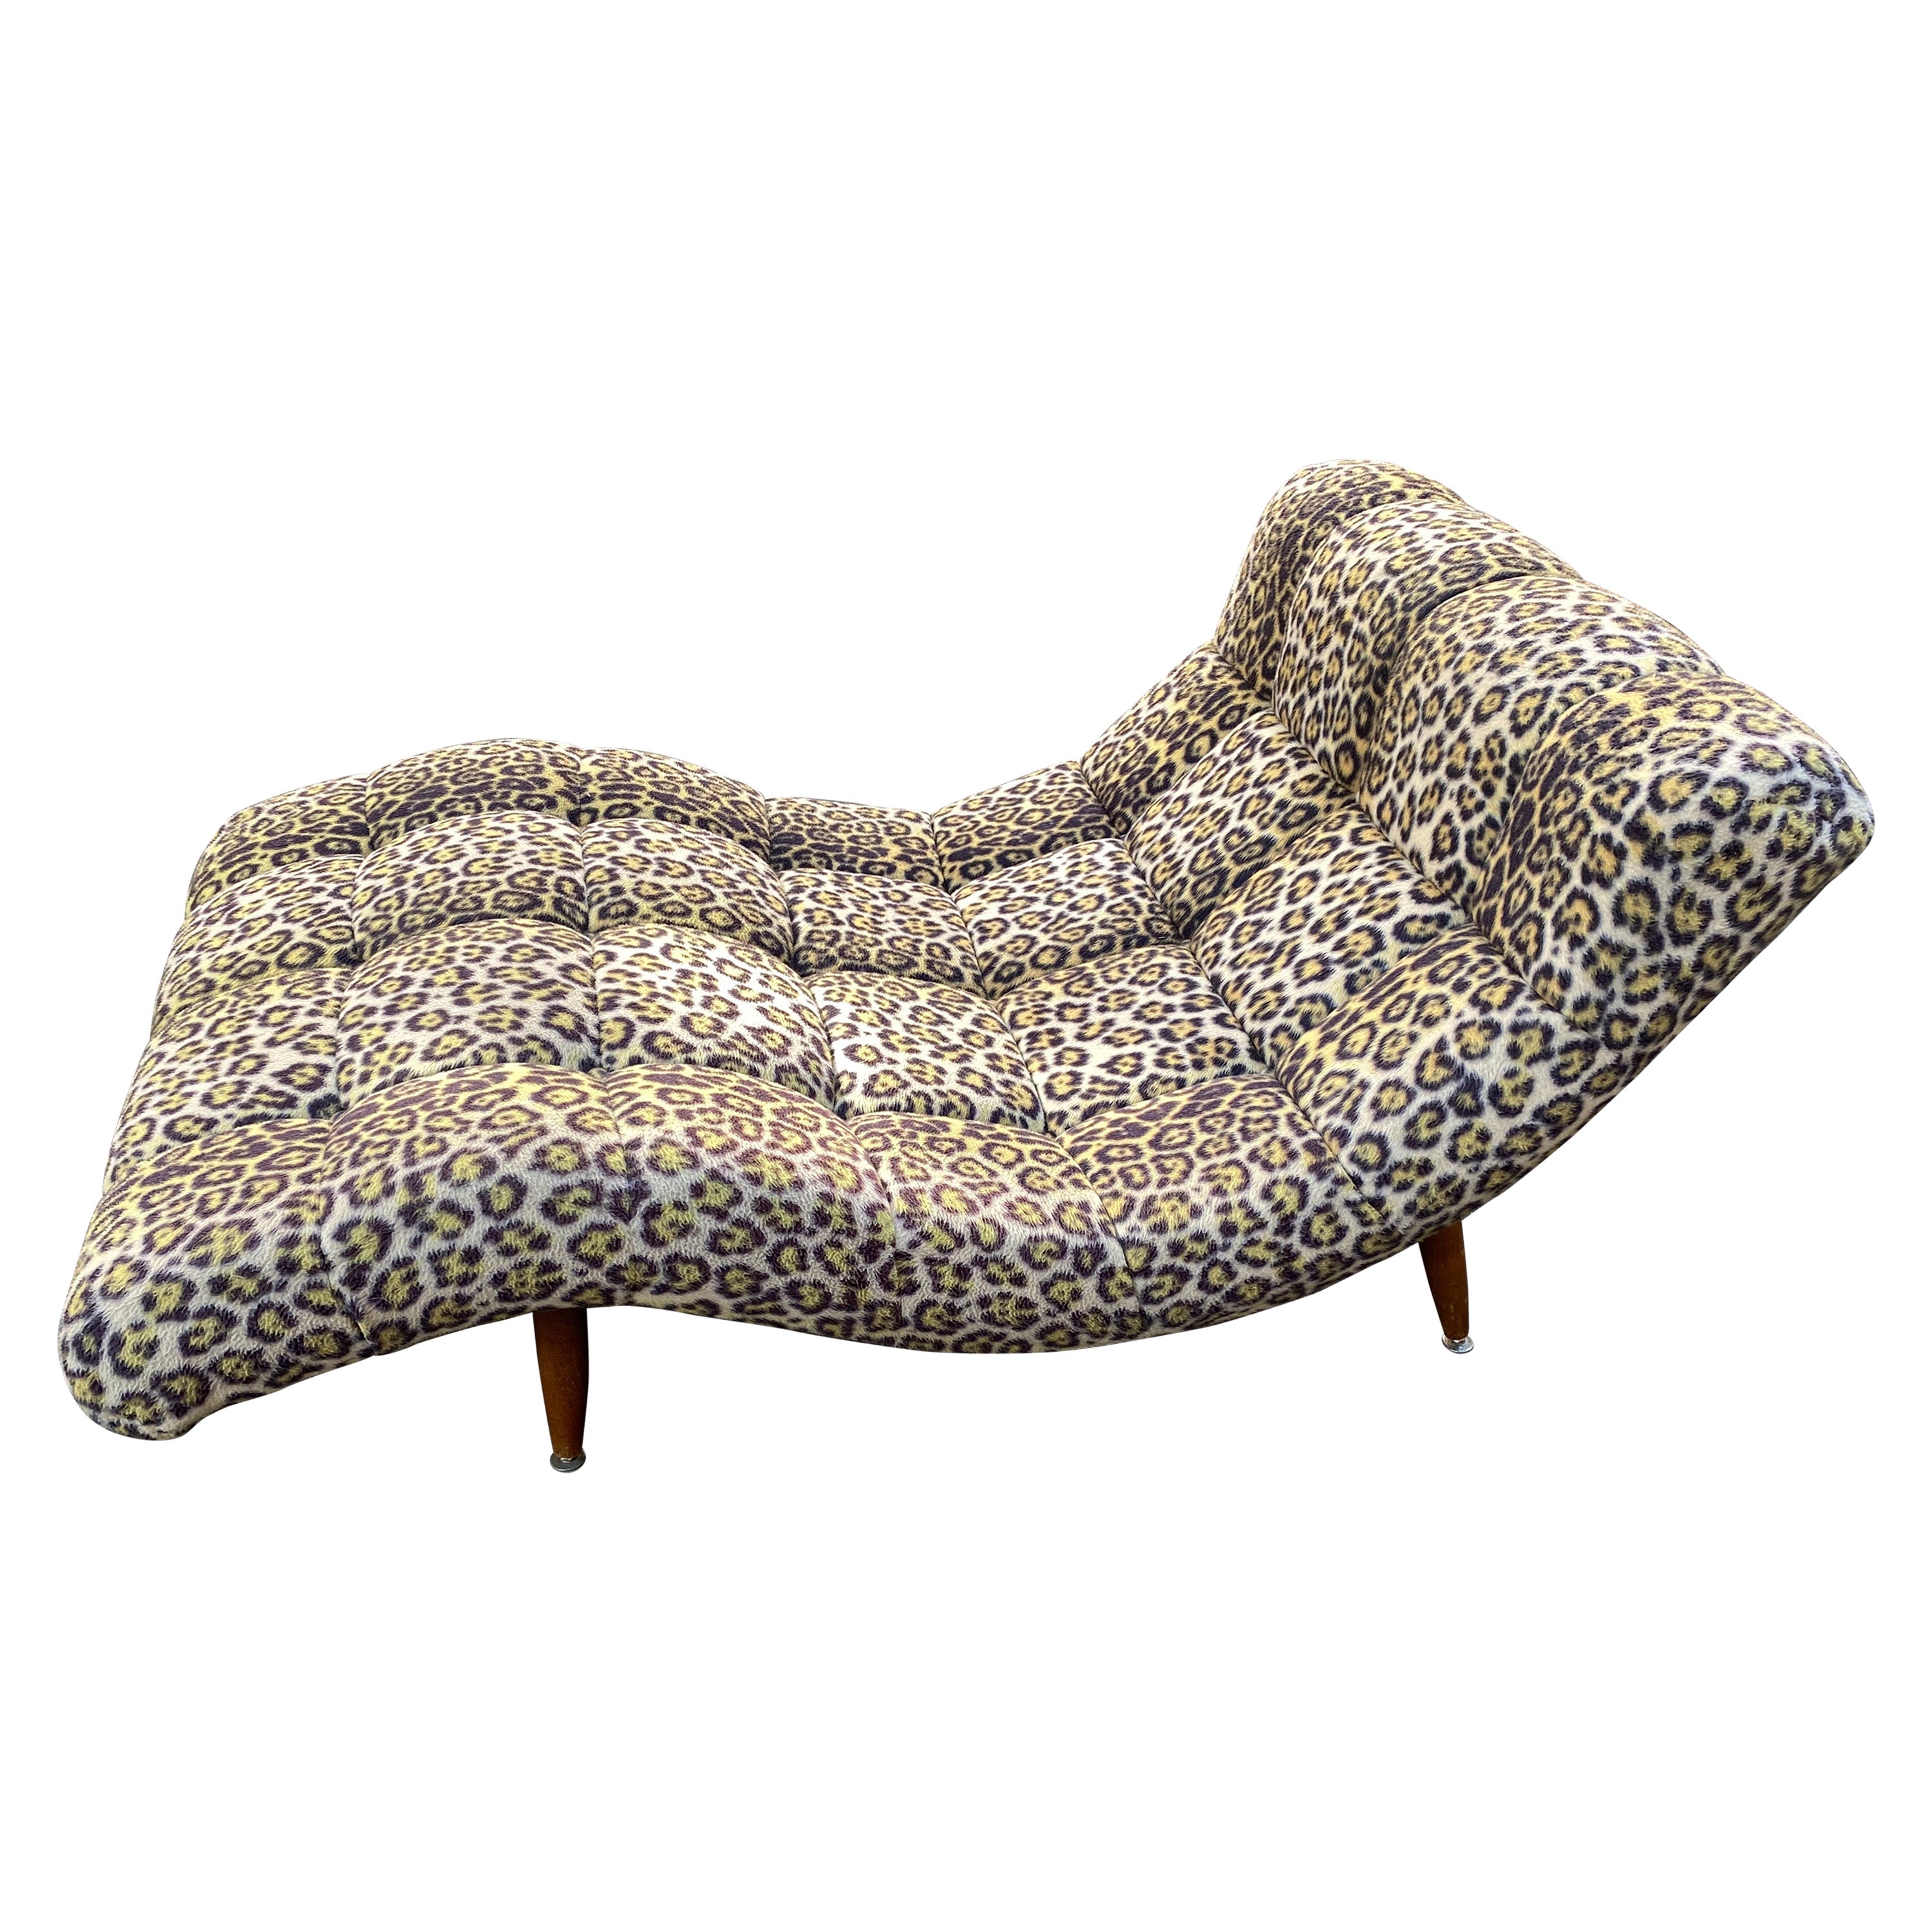 Adrian Pearsall Wave Chaise Lounge for Craft Associates